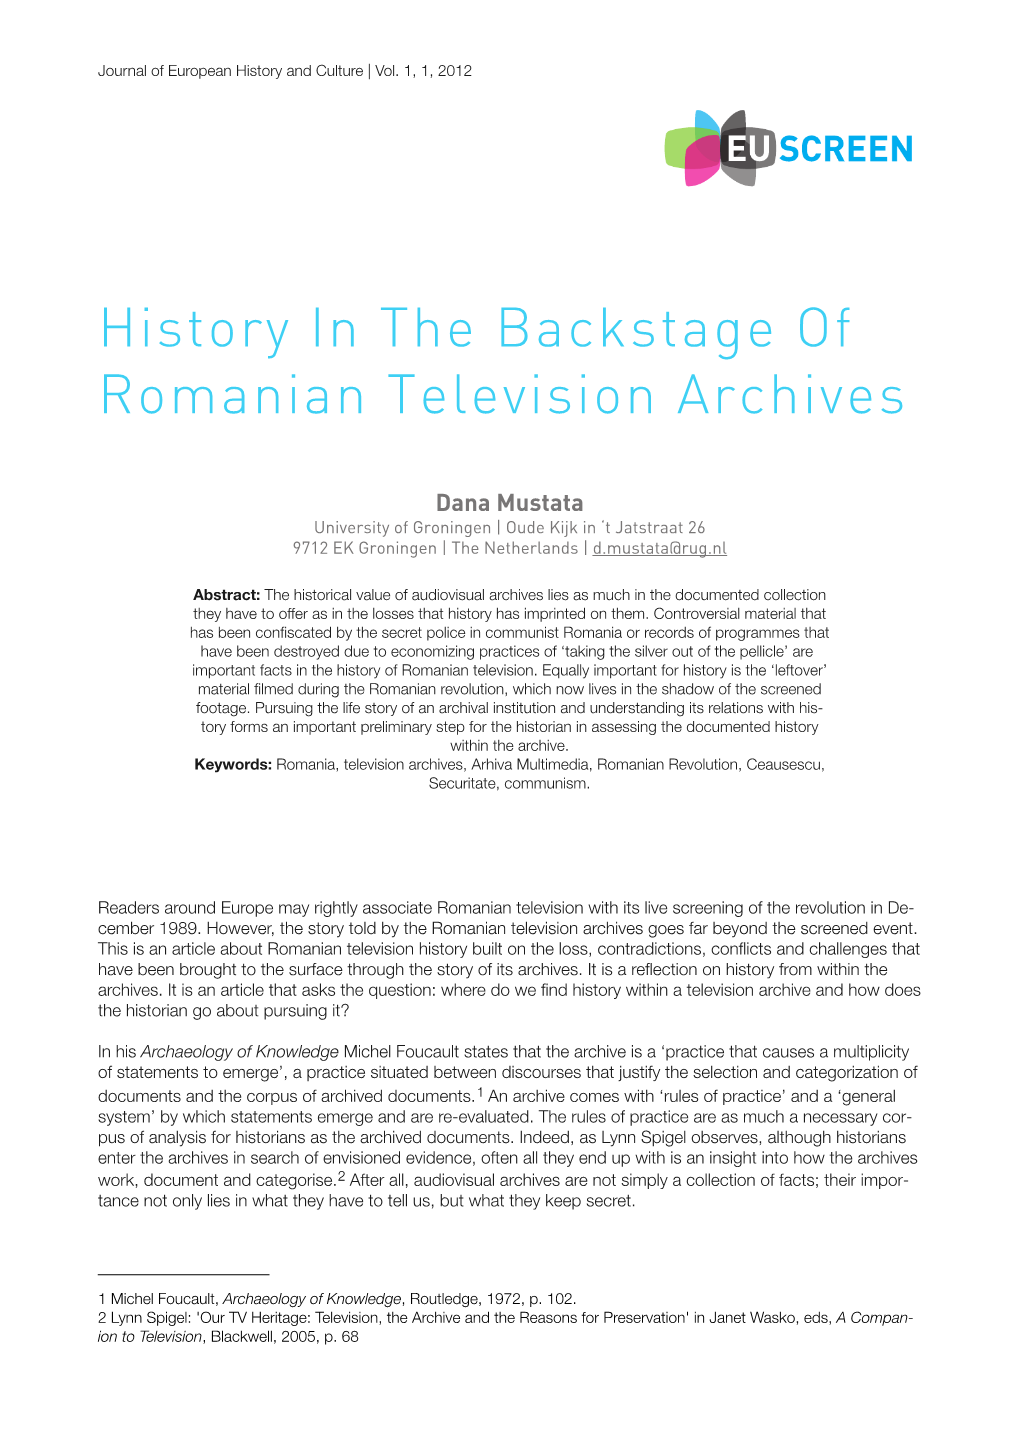 History in the Backstage of Romanian Television Archives